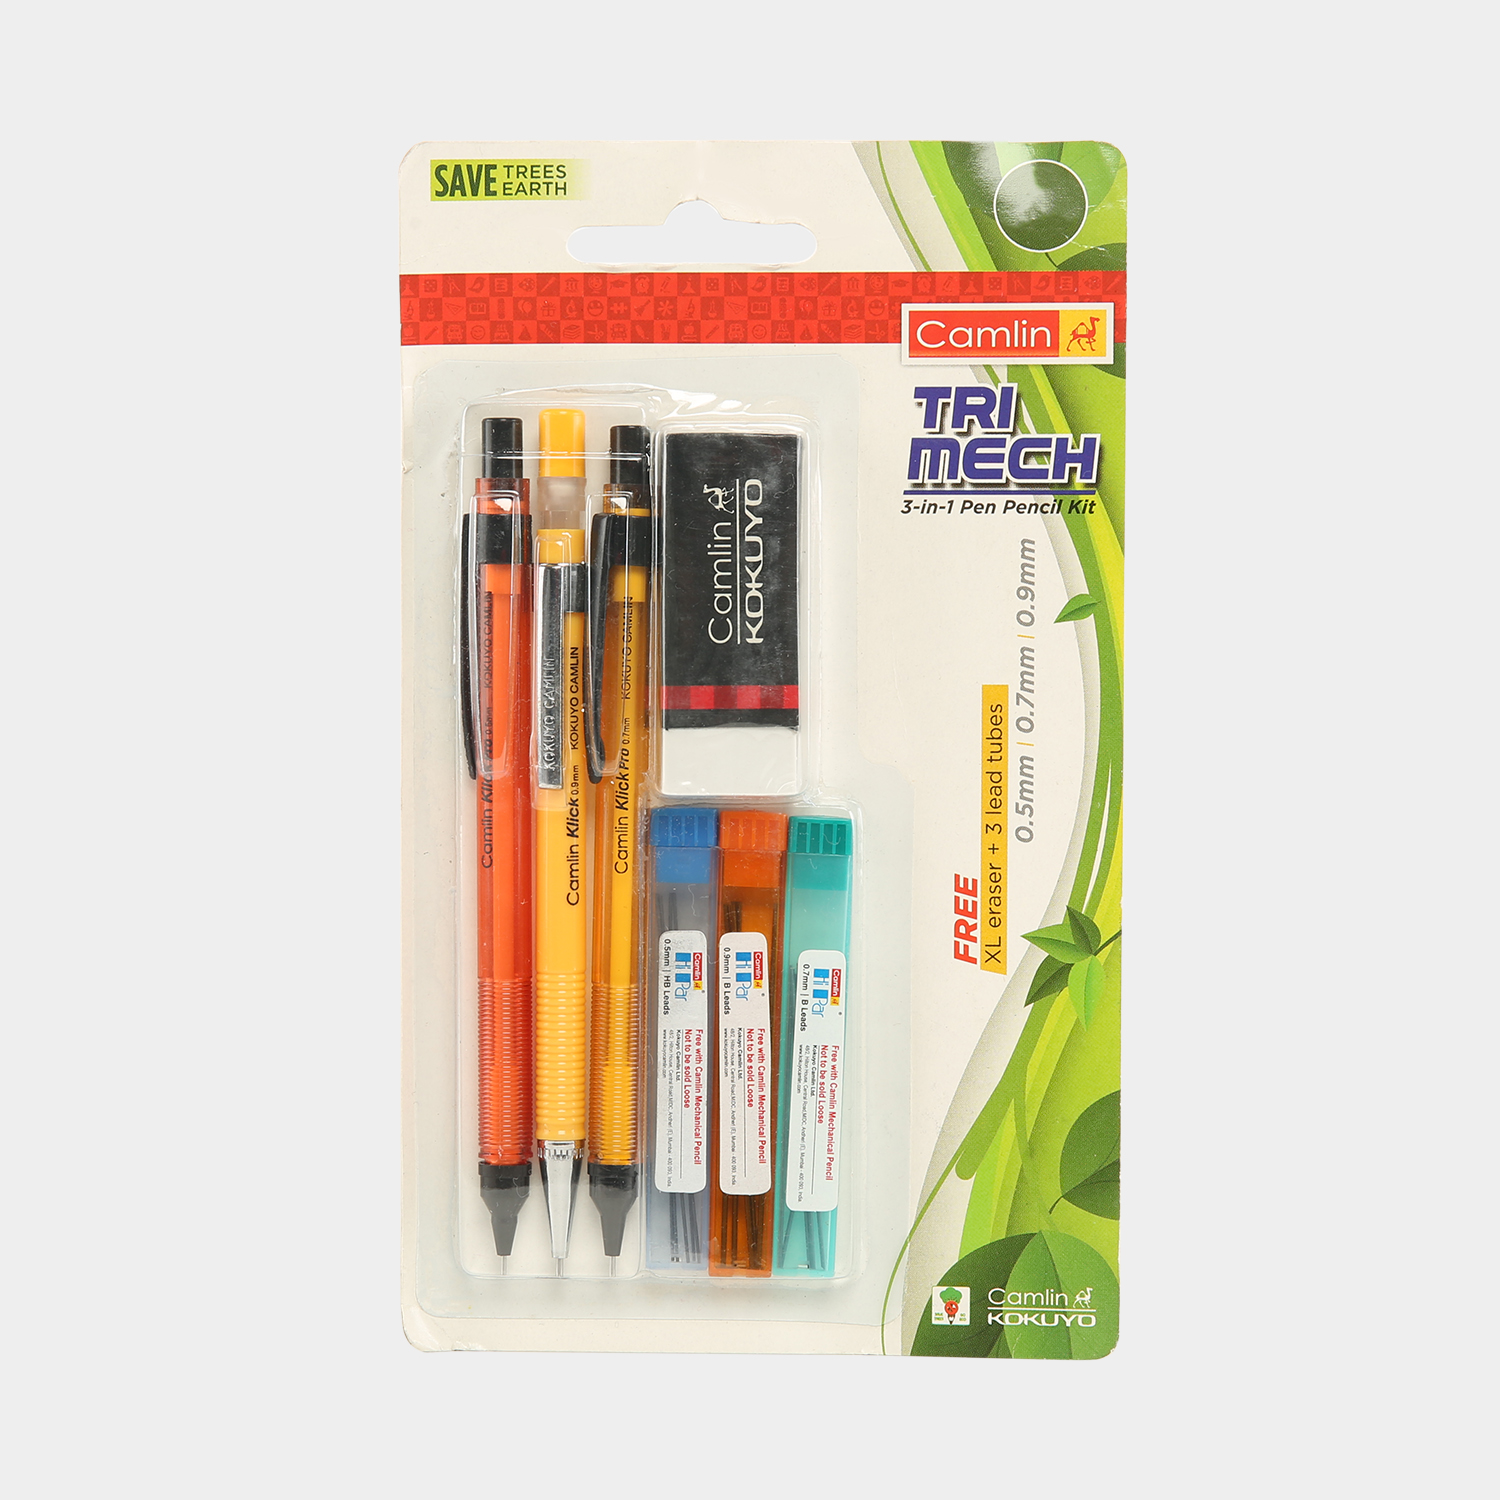 Camlin Trimach Mechanical Pencil - Pack of 3